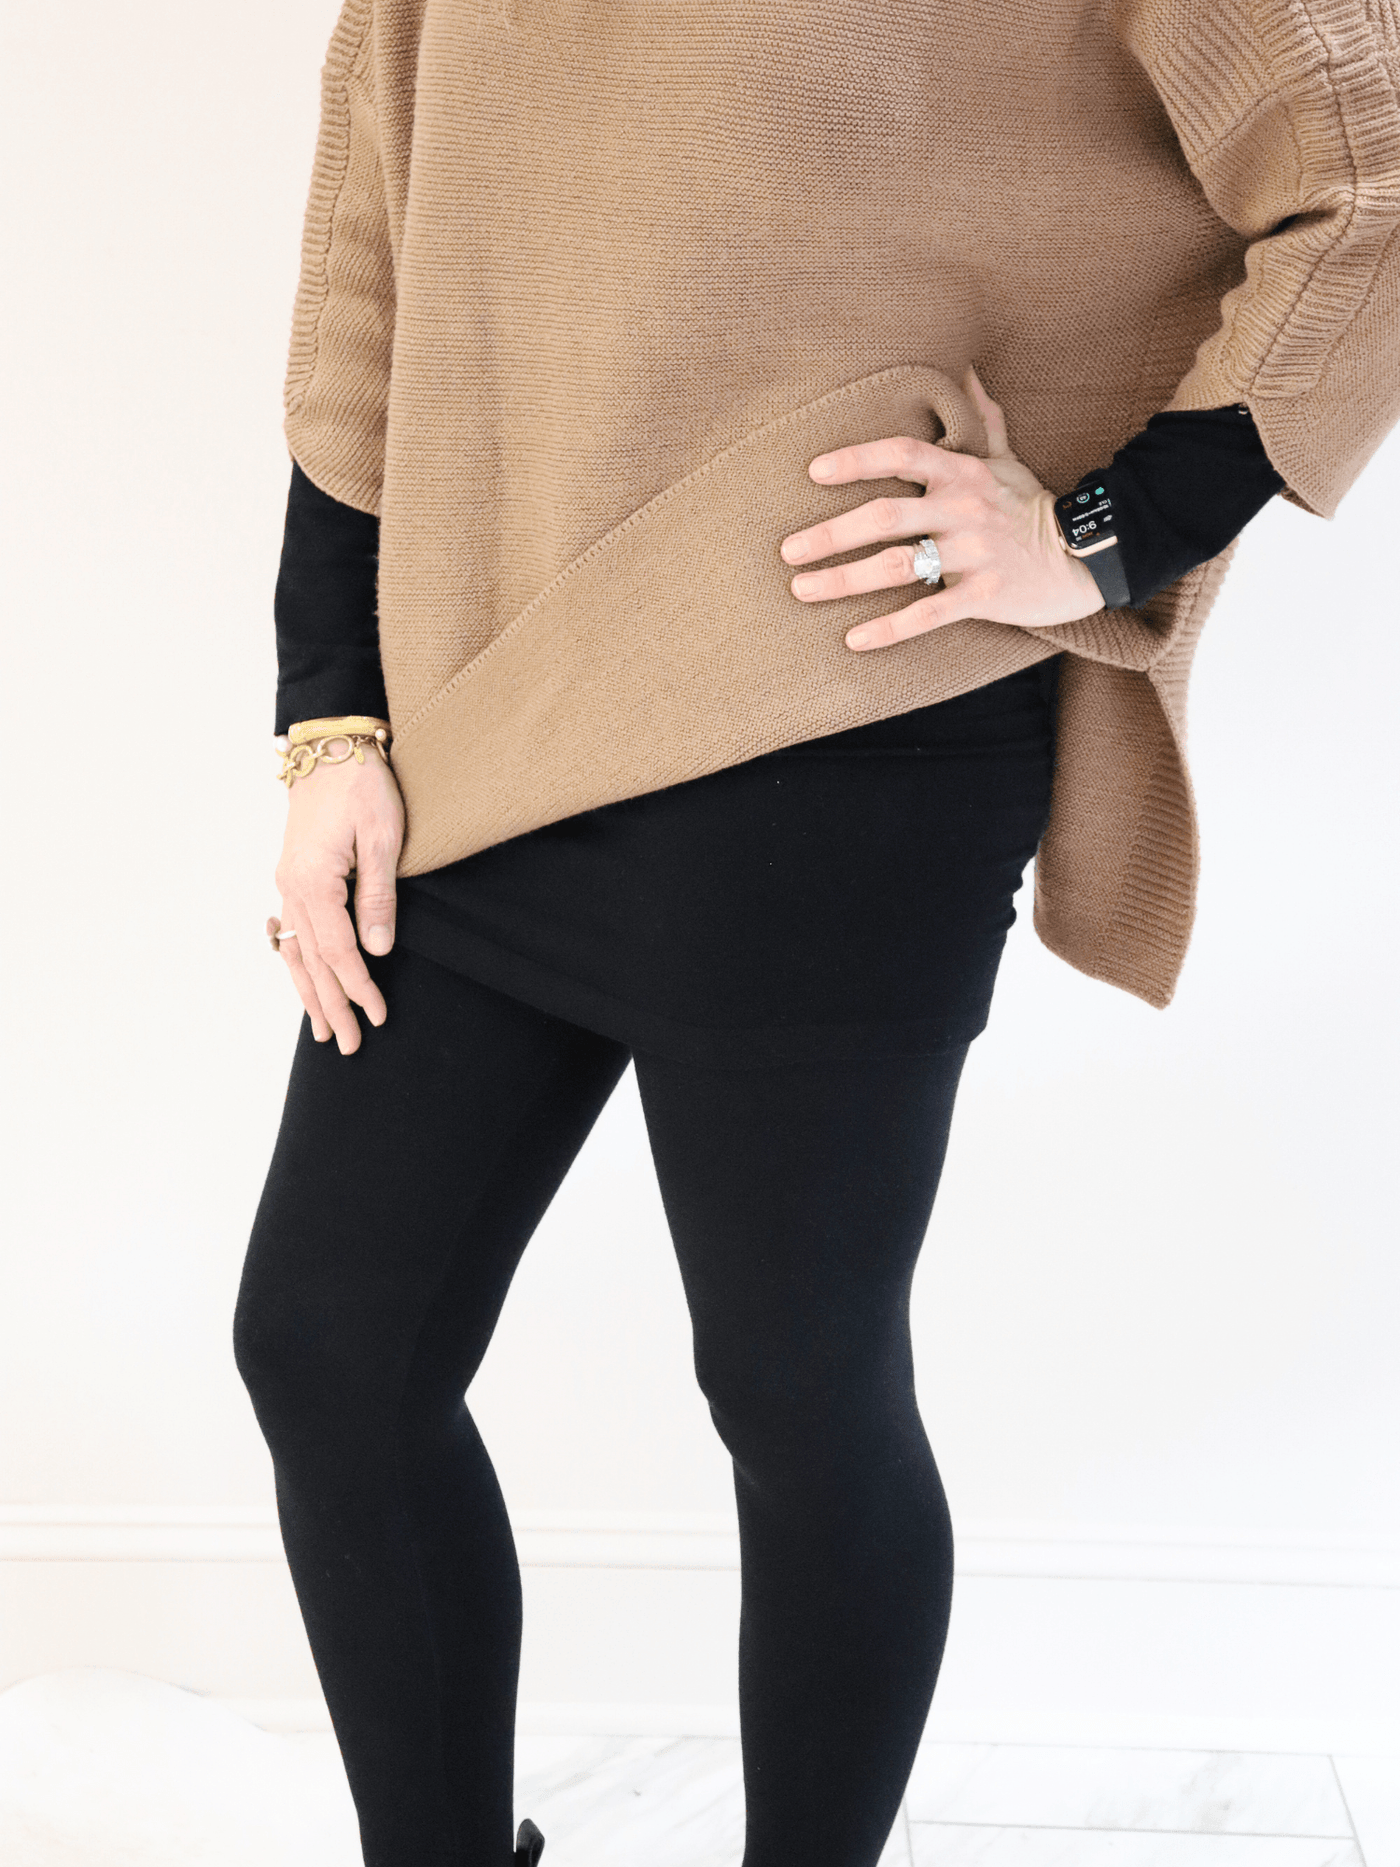 Long Sleeve Layering Top black under a tan Kerisma sweater. front view.